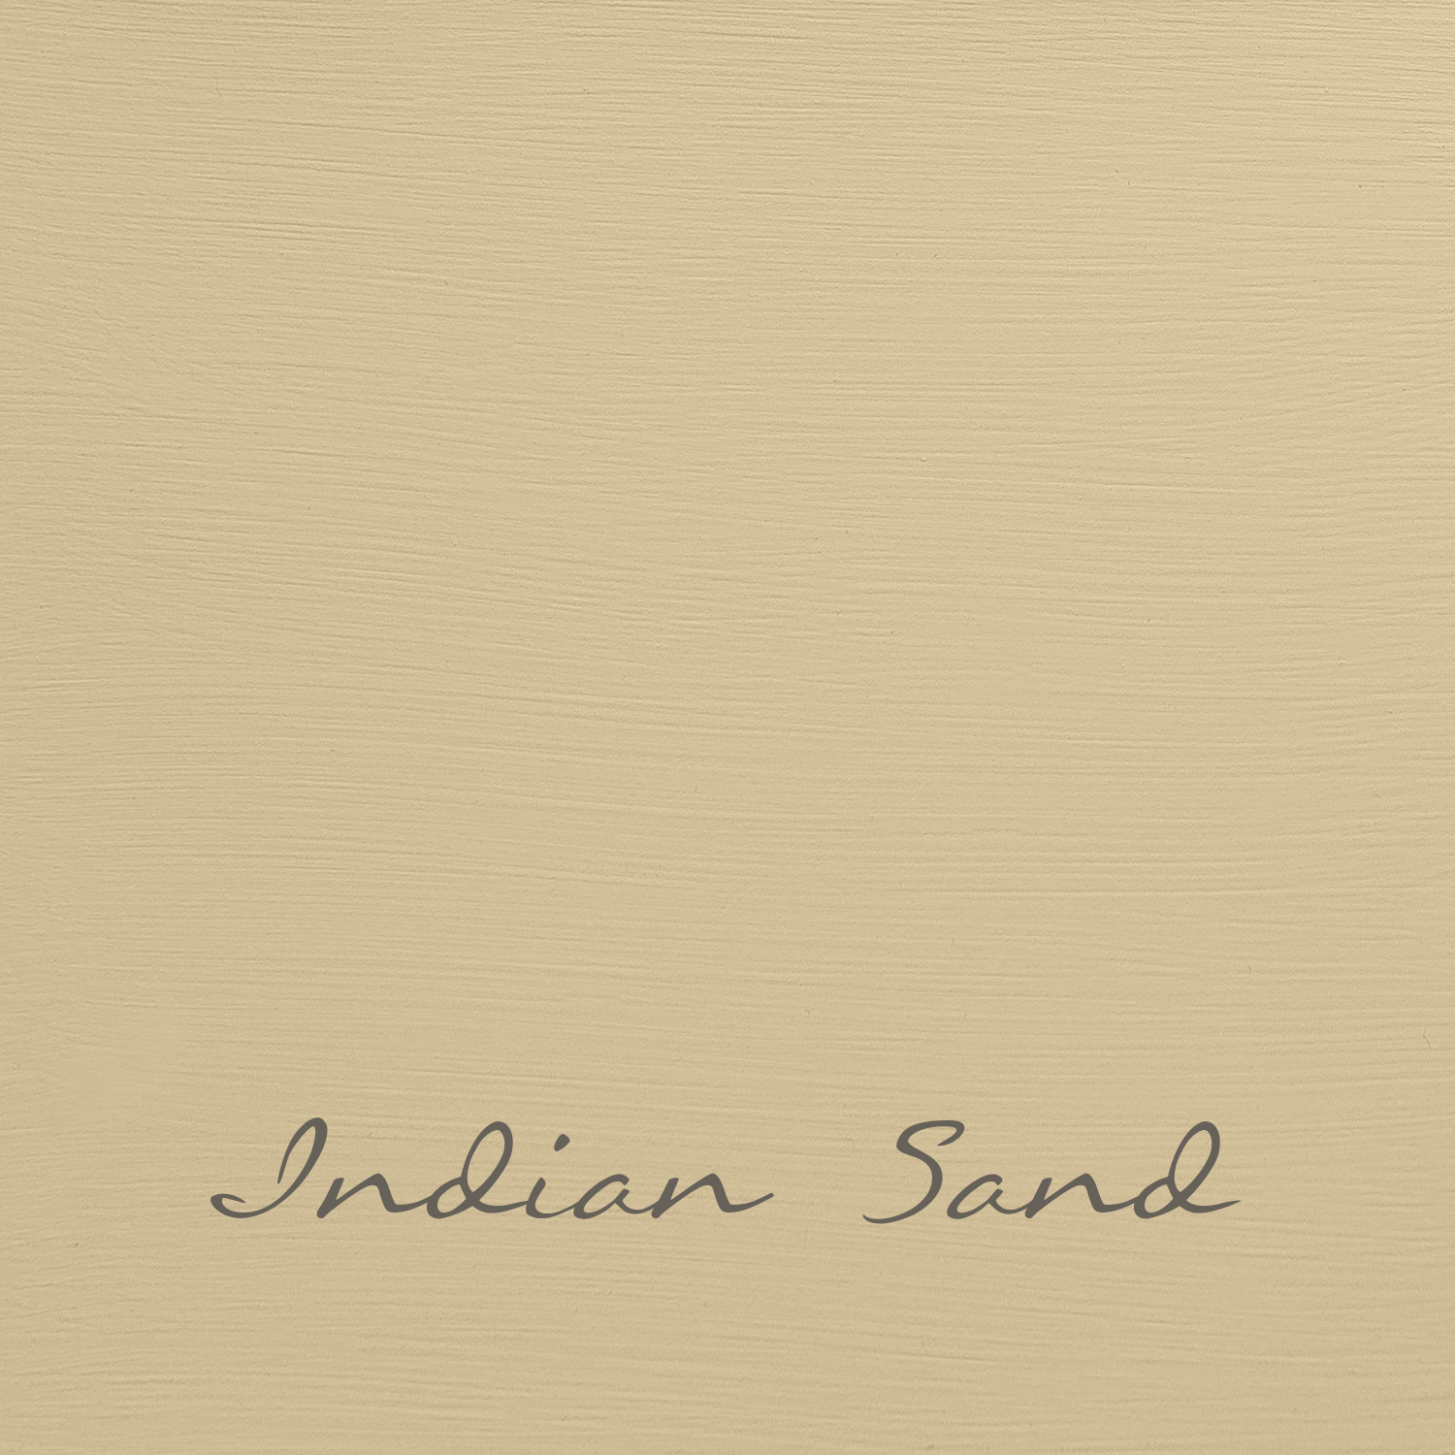 Indian Sand In Autentico Chalk Paint Shabbyand Where To Buy Chalk Paint In India